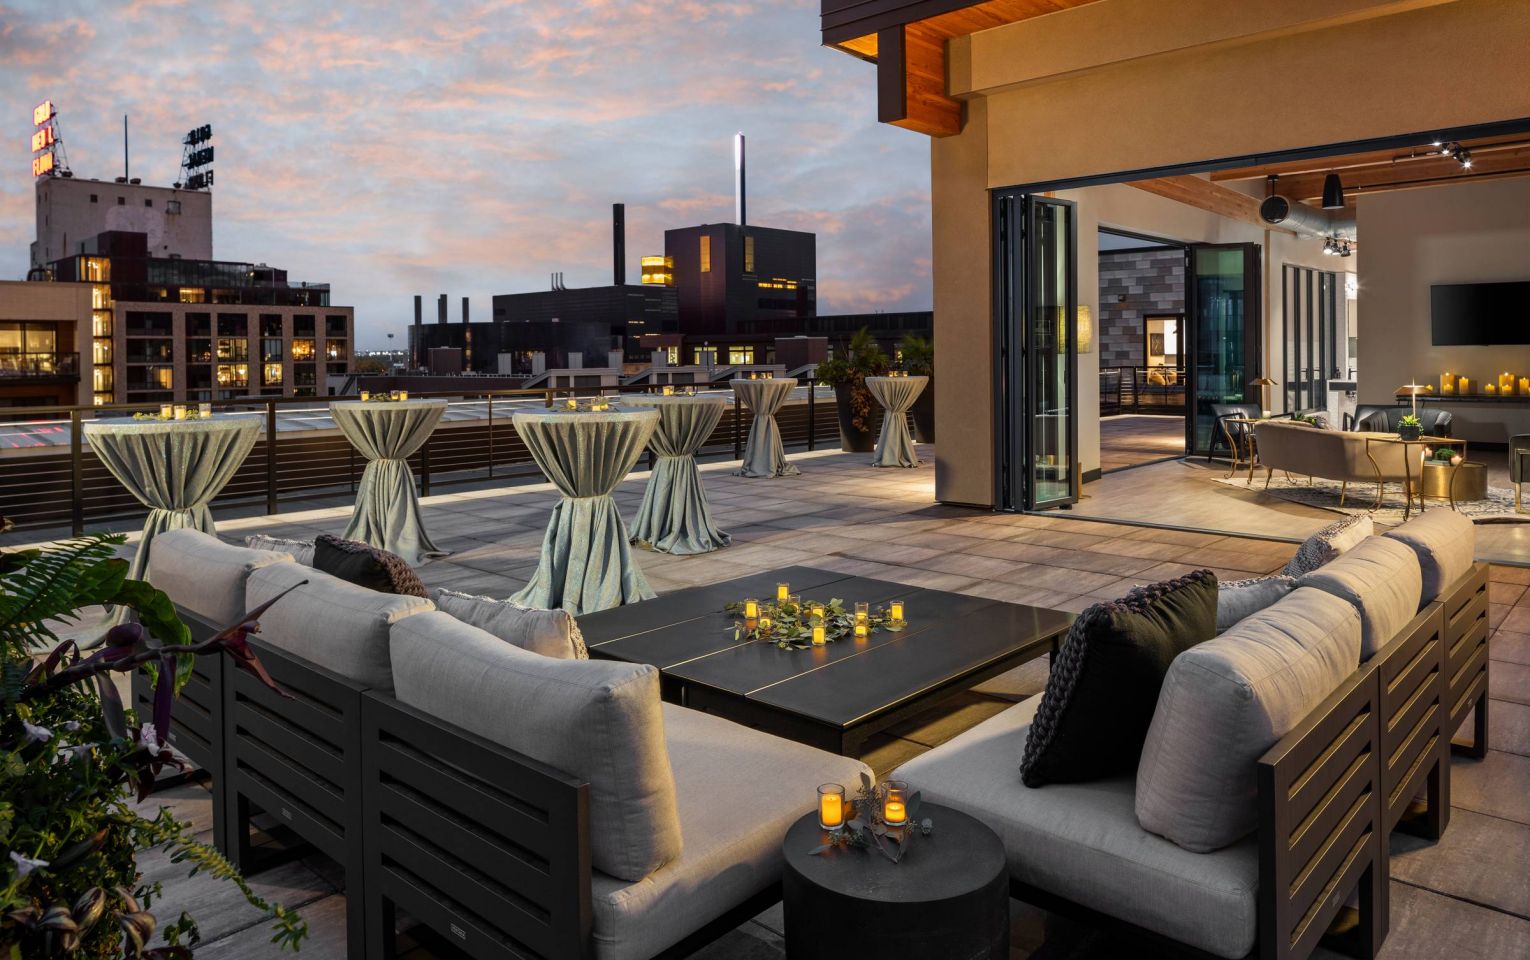 The JI Case rooftop terrace is set for a night event, with stylish draped tables and a city skyline under a twilight sky.